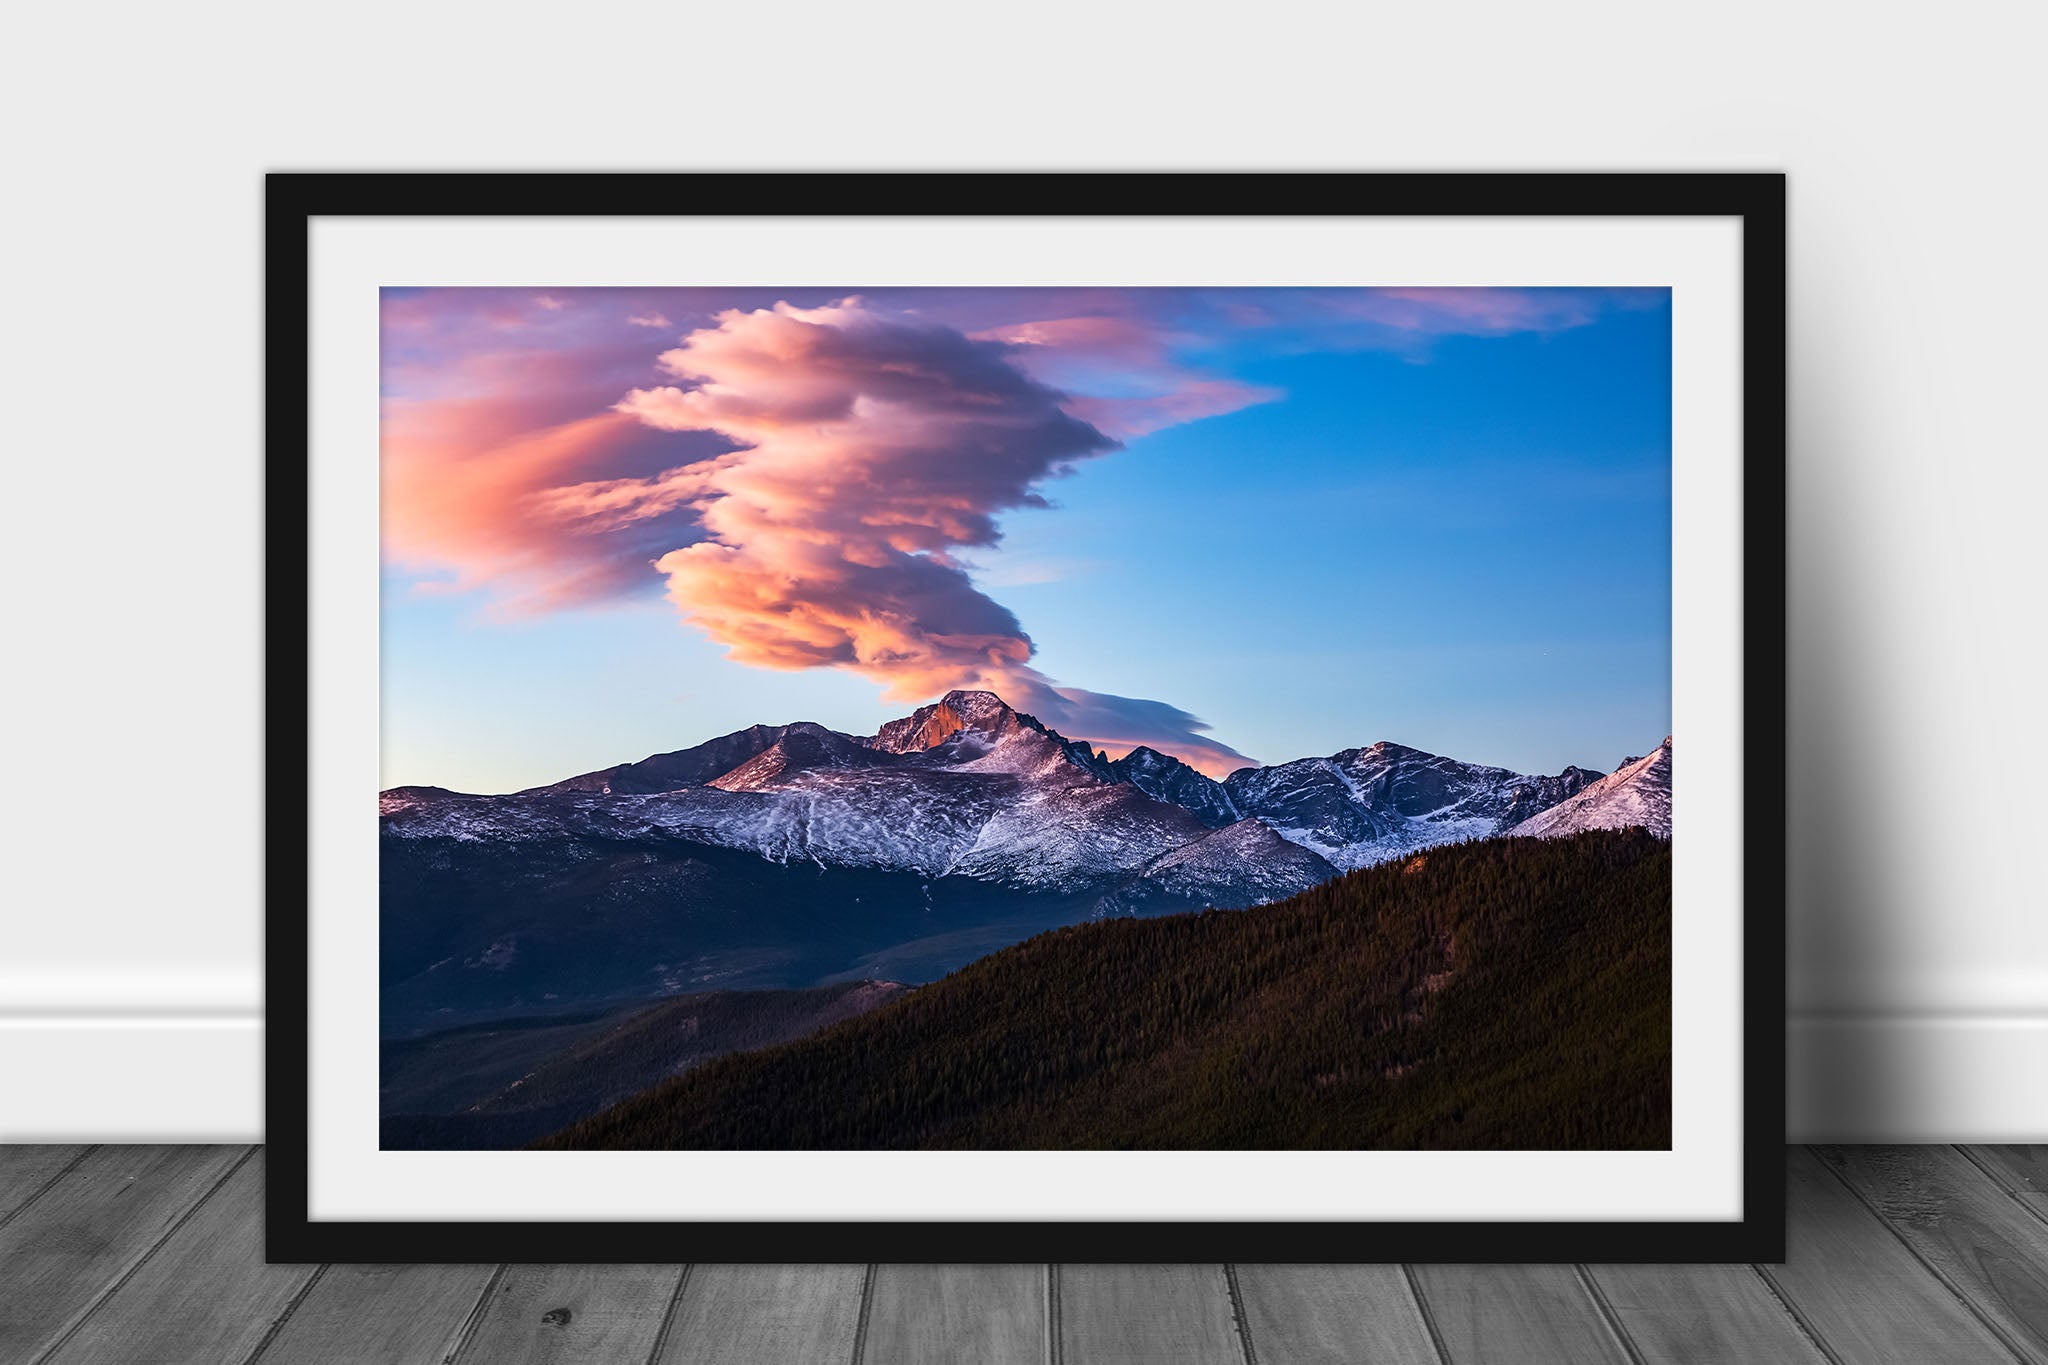 Framed western landscape print of Longs Peak with a cloud rising above illuminated by morning sunlight at sunrise in Rocky Mountain National Park, Colorado by Sean Ramsey of Southern Plains Photography.